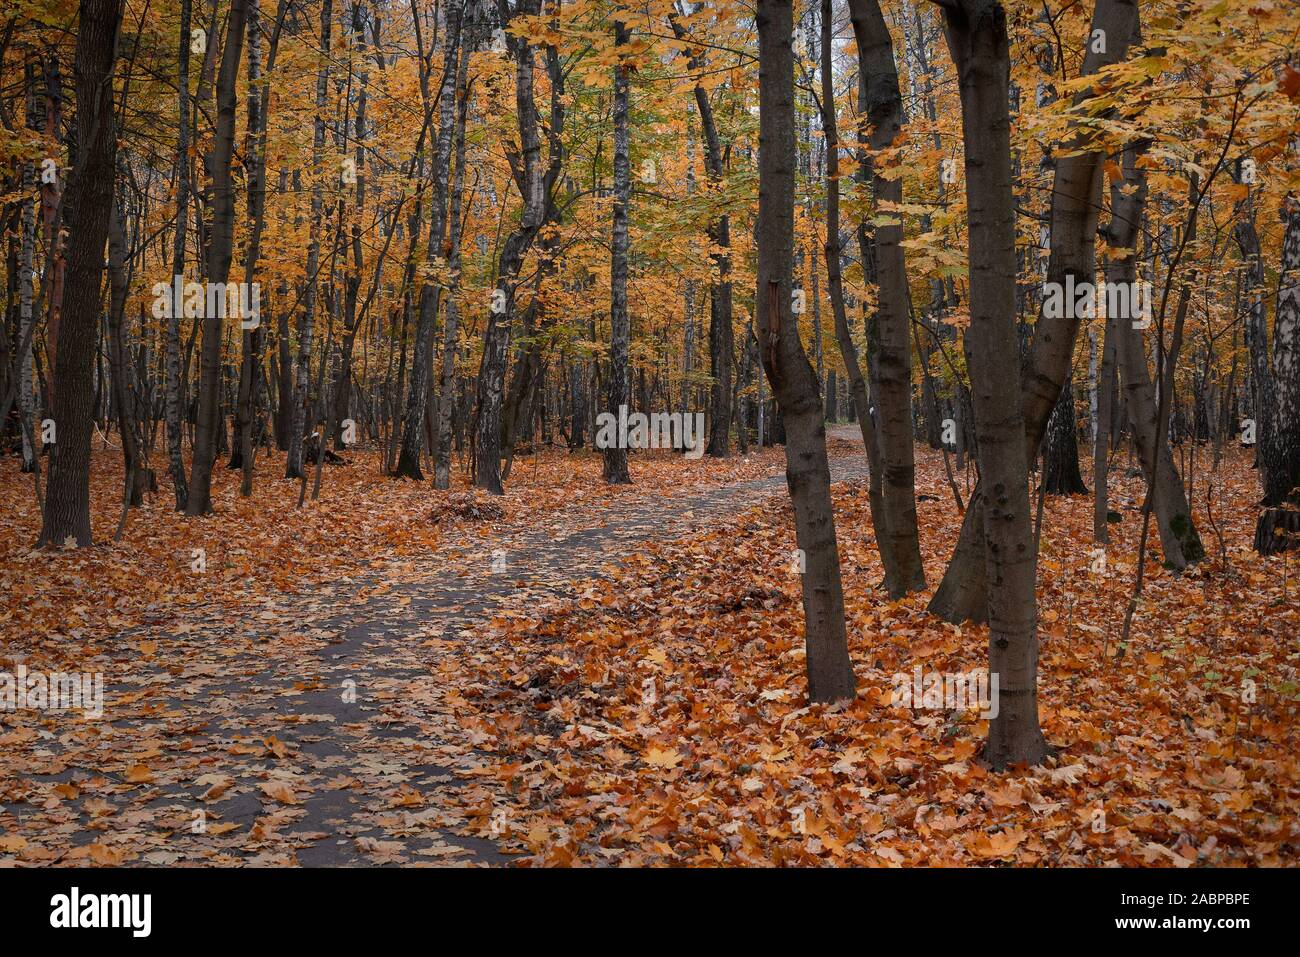 Old park with a path, with fallen leaves and yellowed leaves on the trees Stock Photo